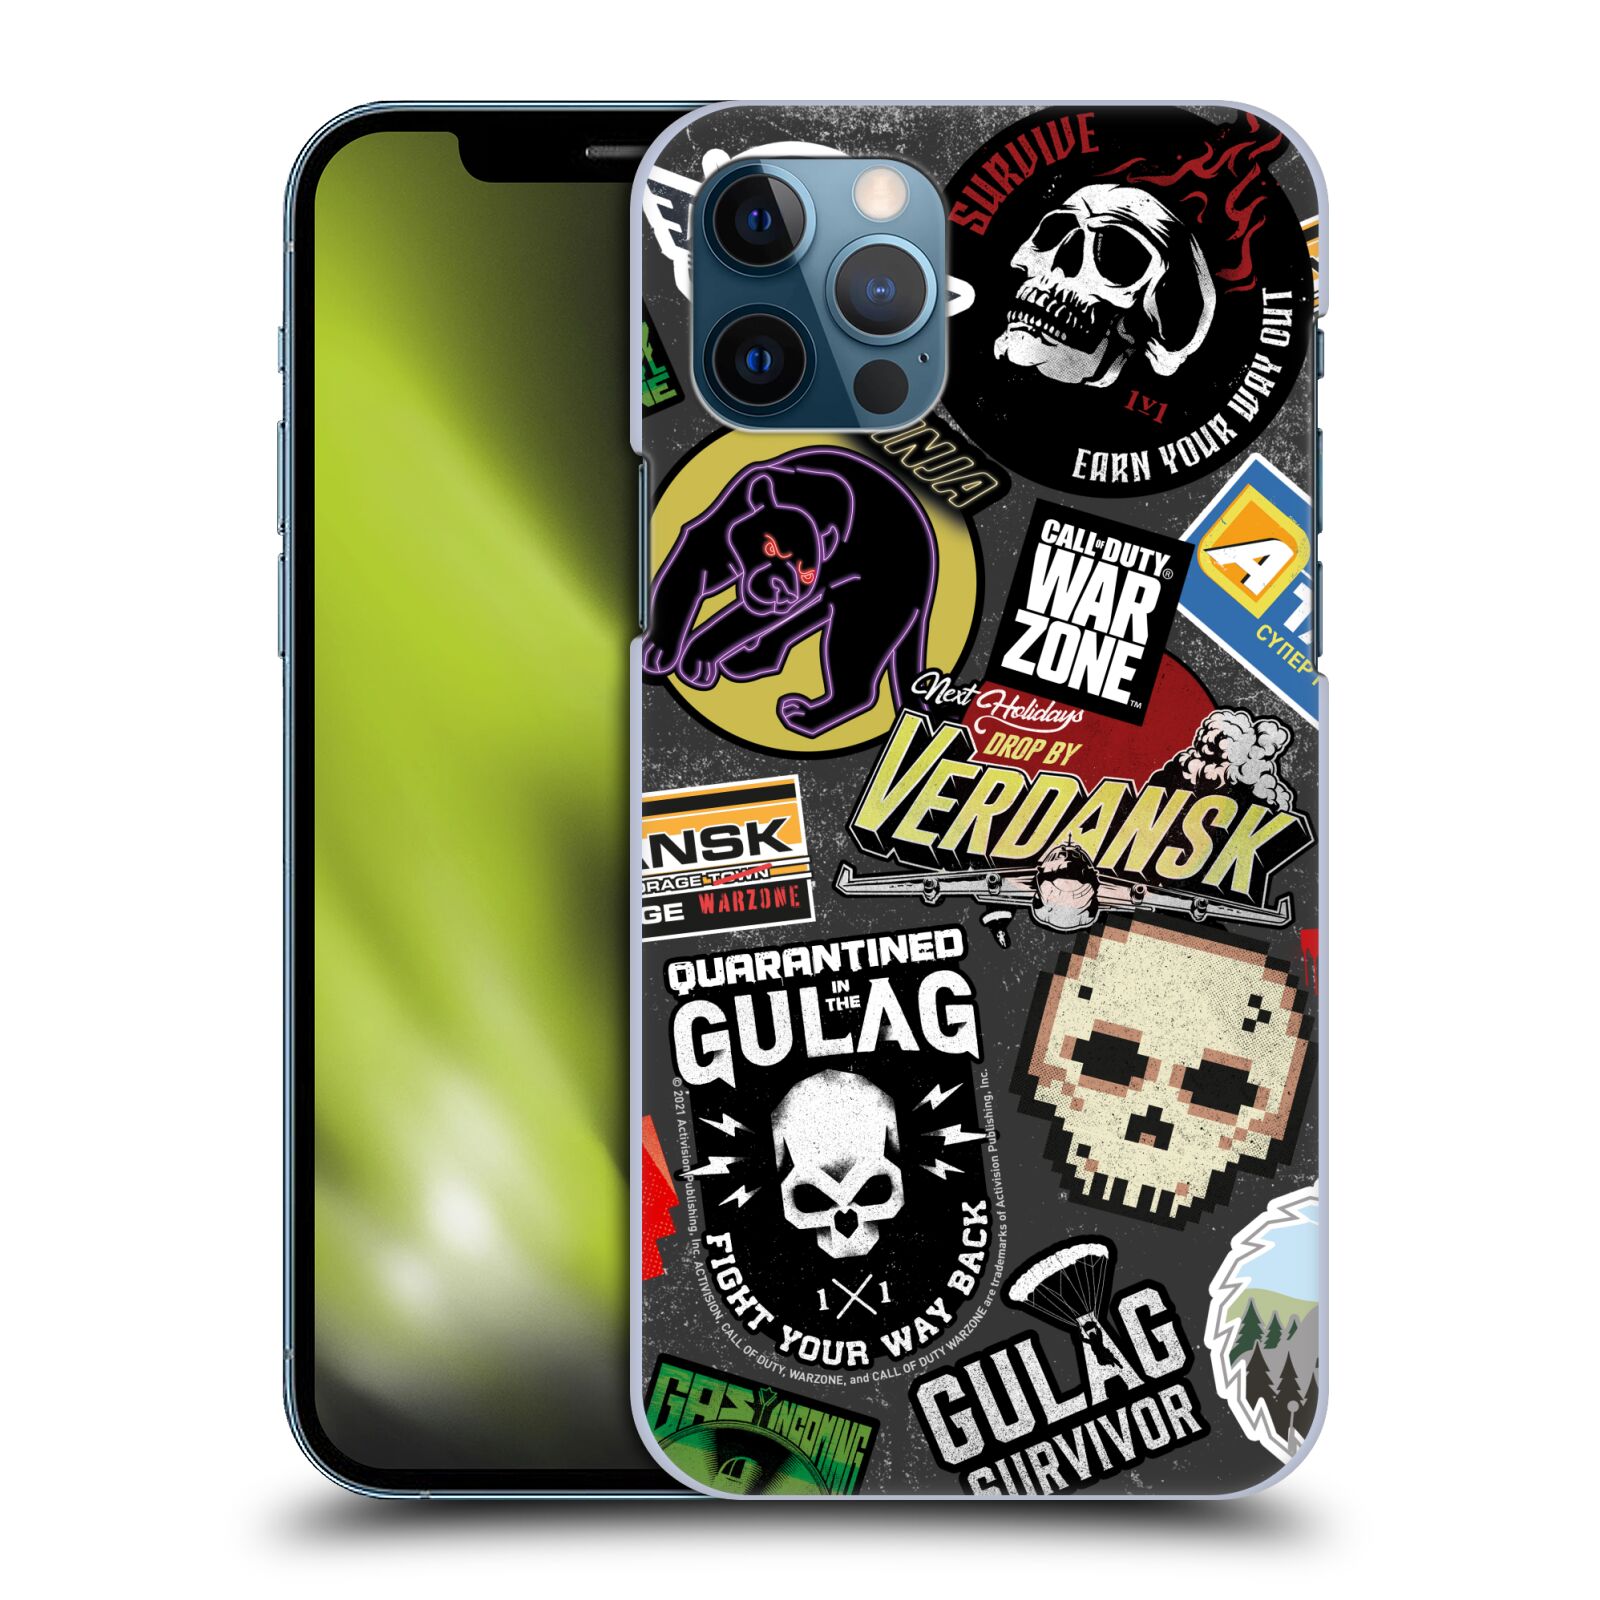 Zadní obal pro mobil Apple iPhone 12 / iPhone 12 Pro - HEAD CASE - Call of Duty Warzone - Sticker Bomb